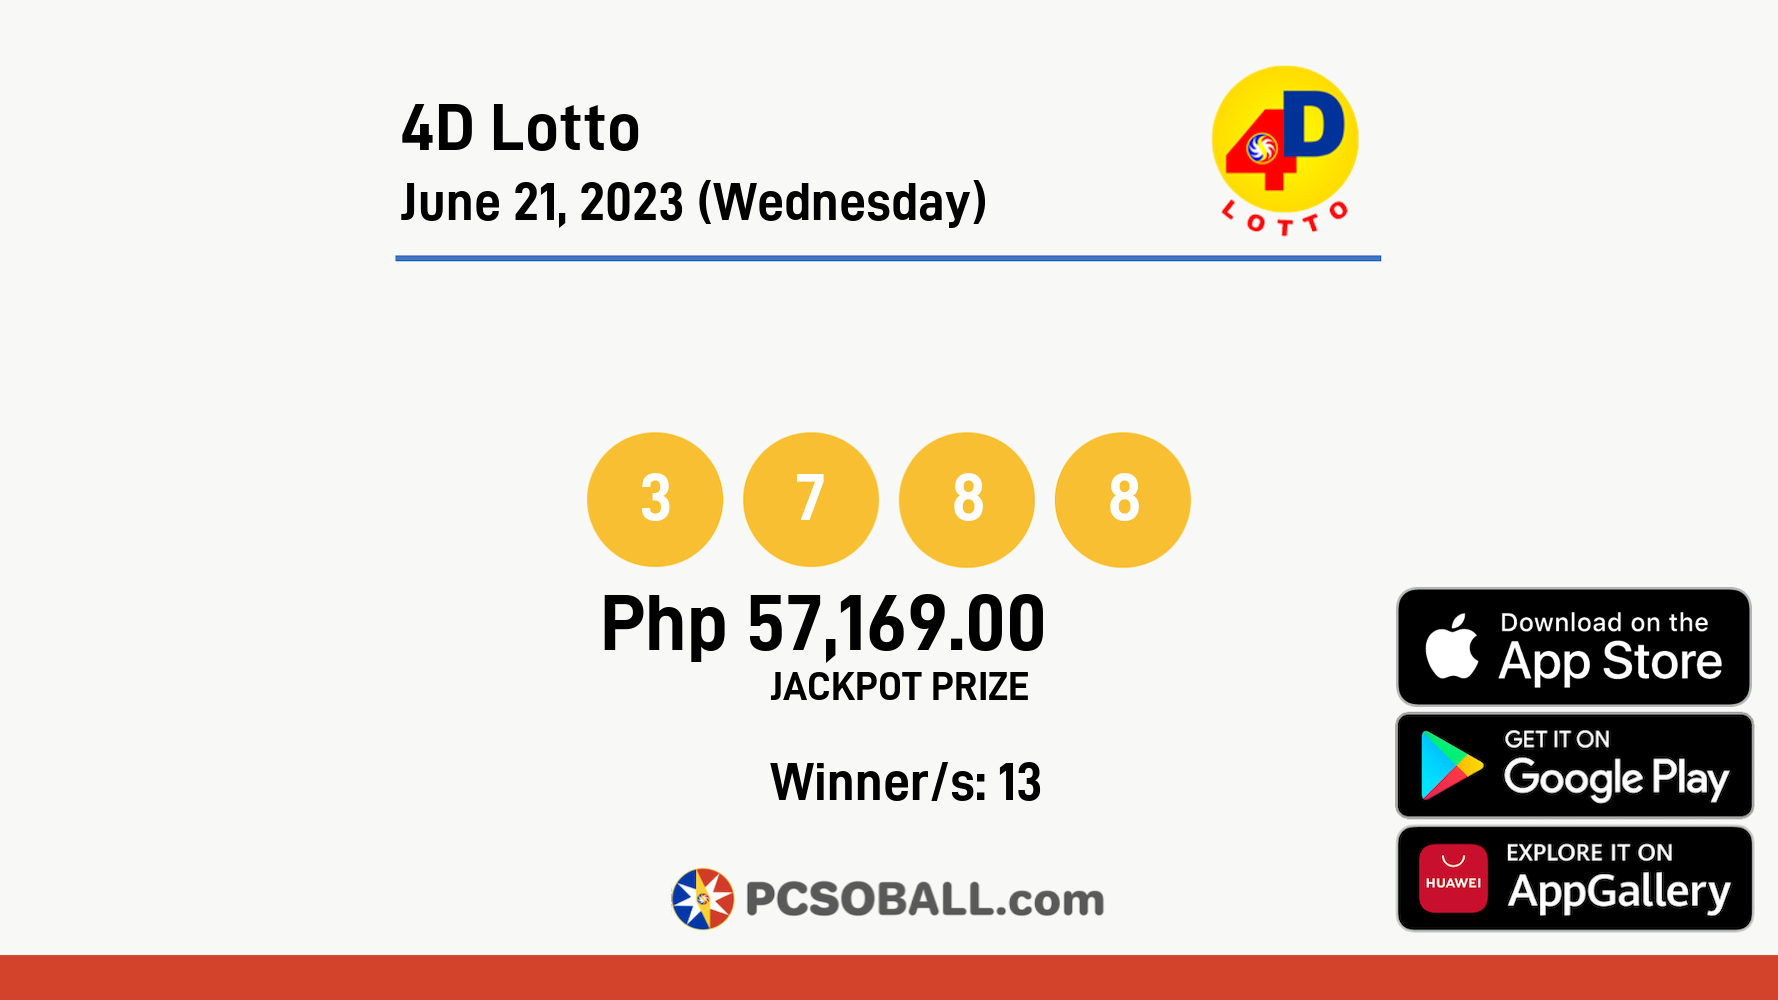 4D Lotto June 21, 2023 (Wednesday) Result